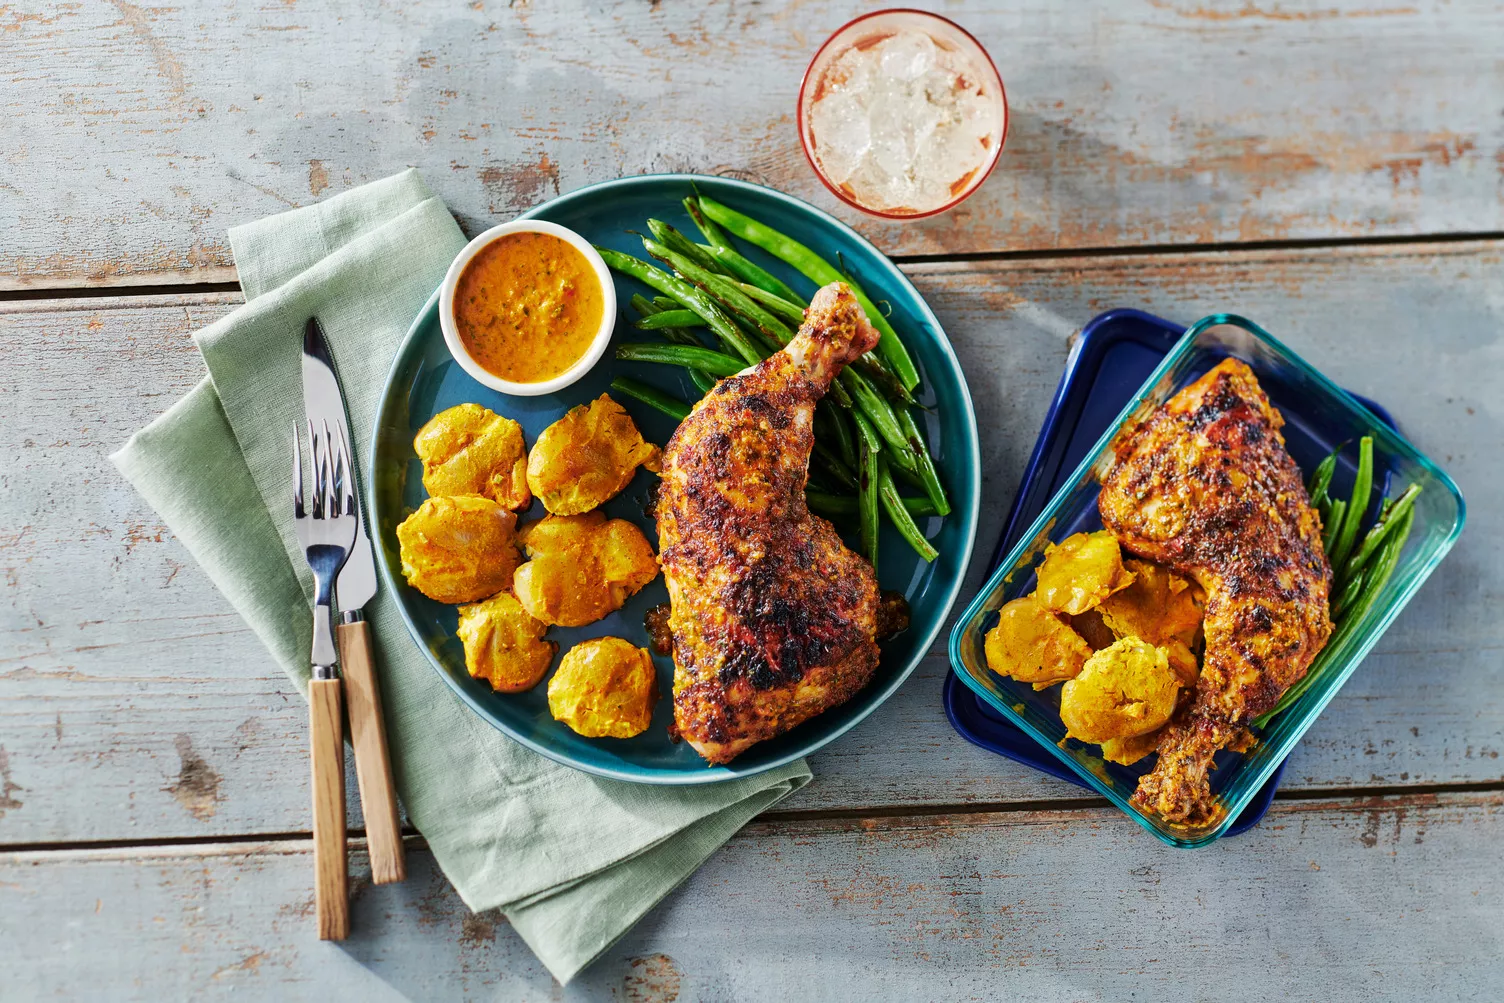 A plate of piri piri chicken and green beans with little potatoes.